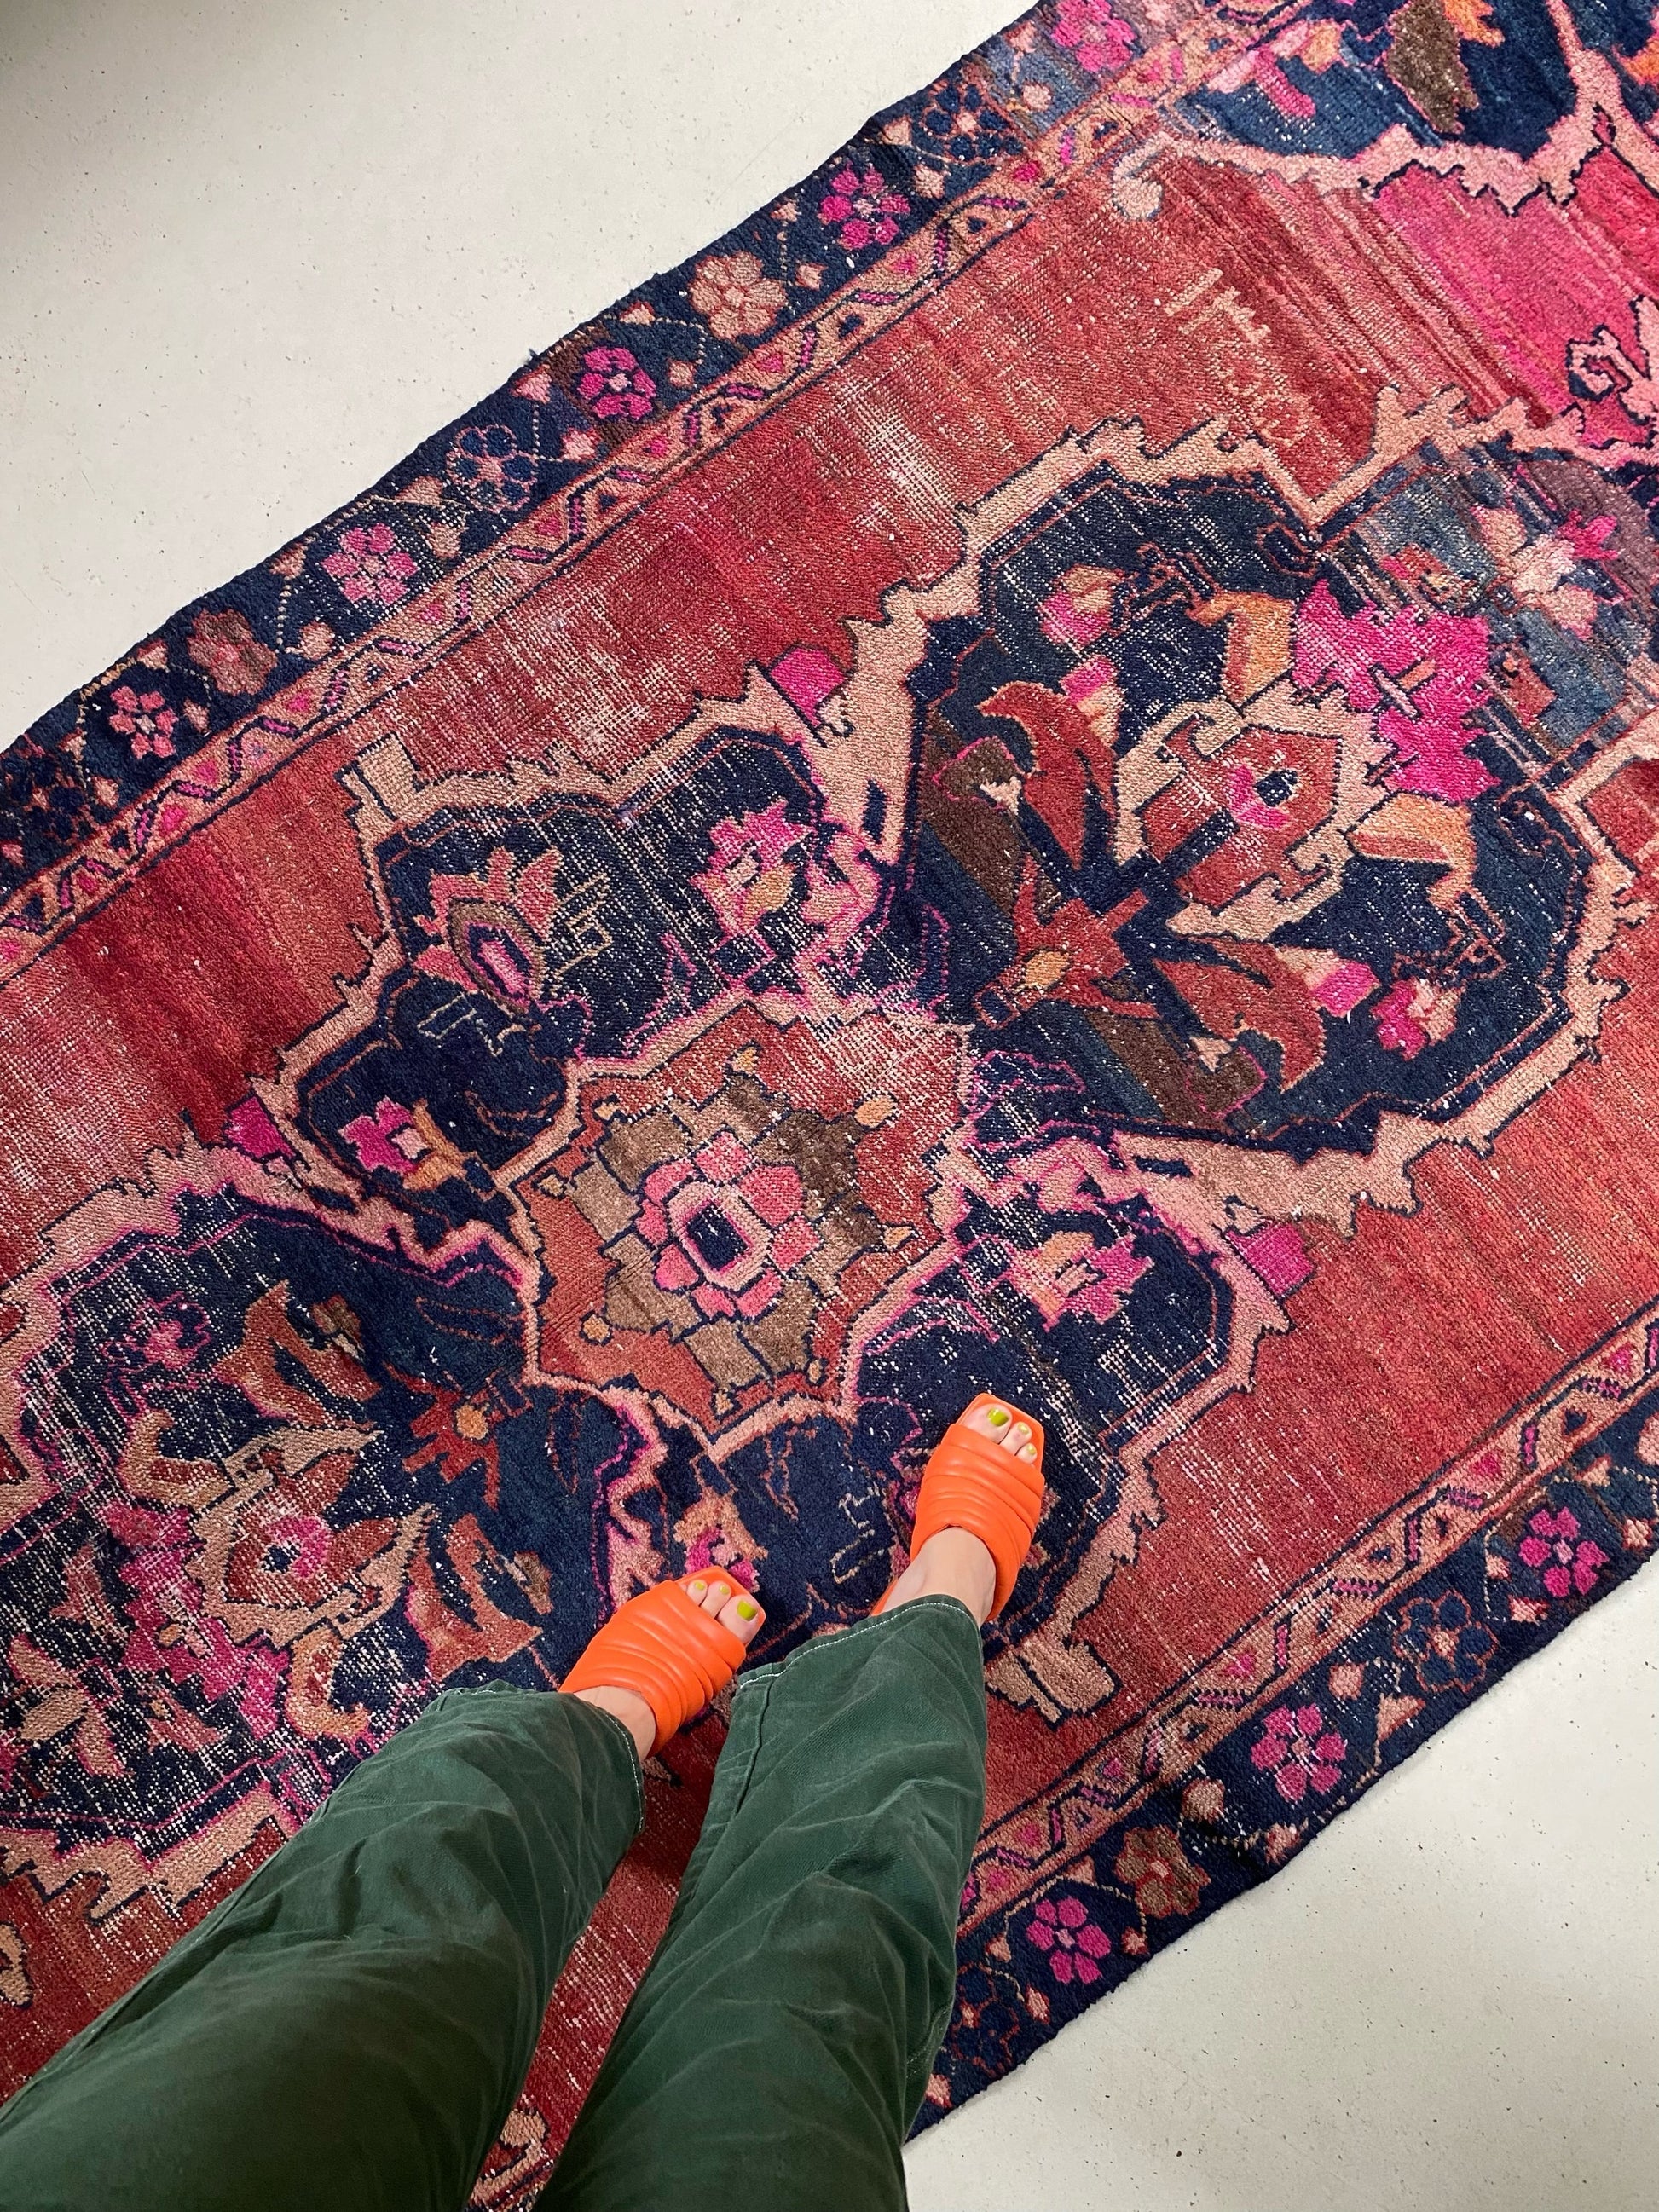 An antique treasure like the Lili Persian rug complements every space